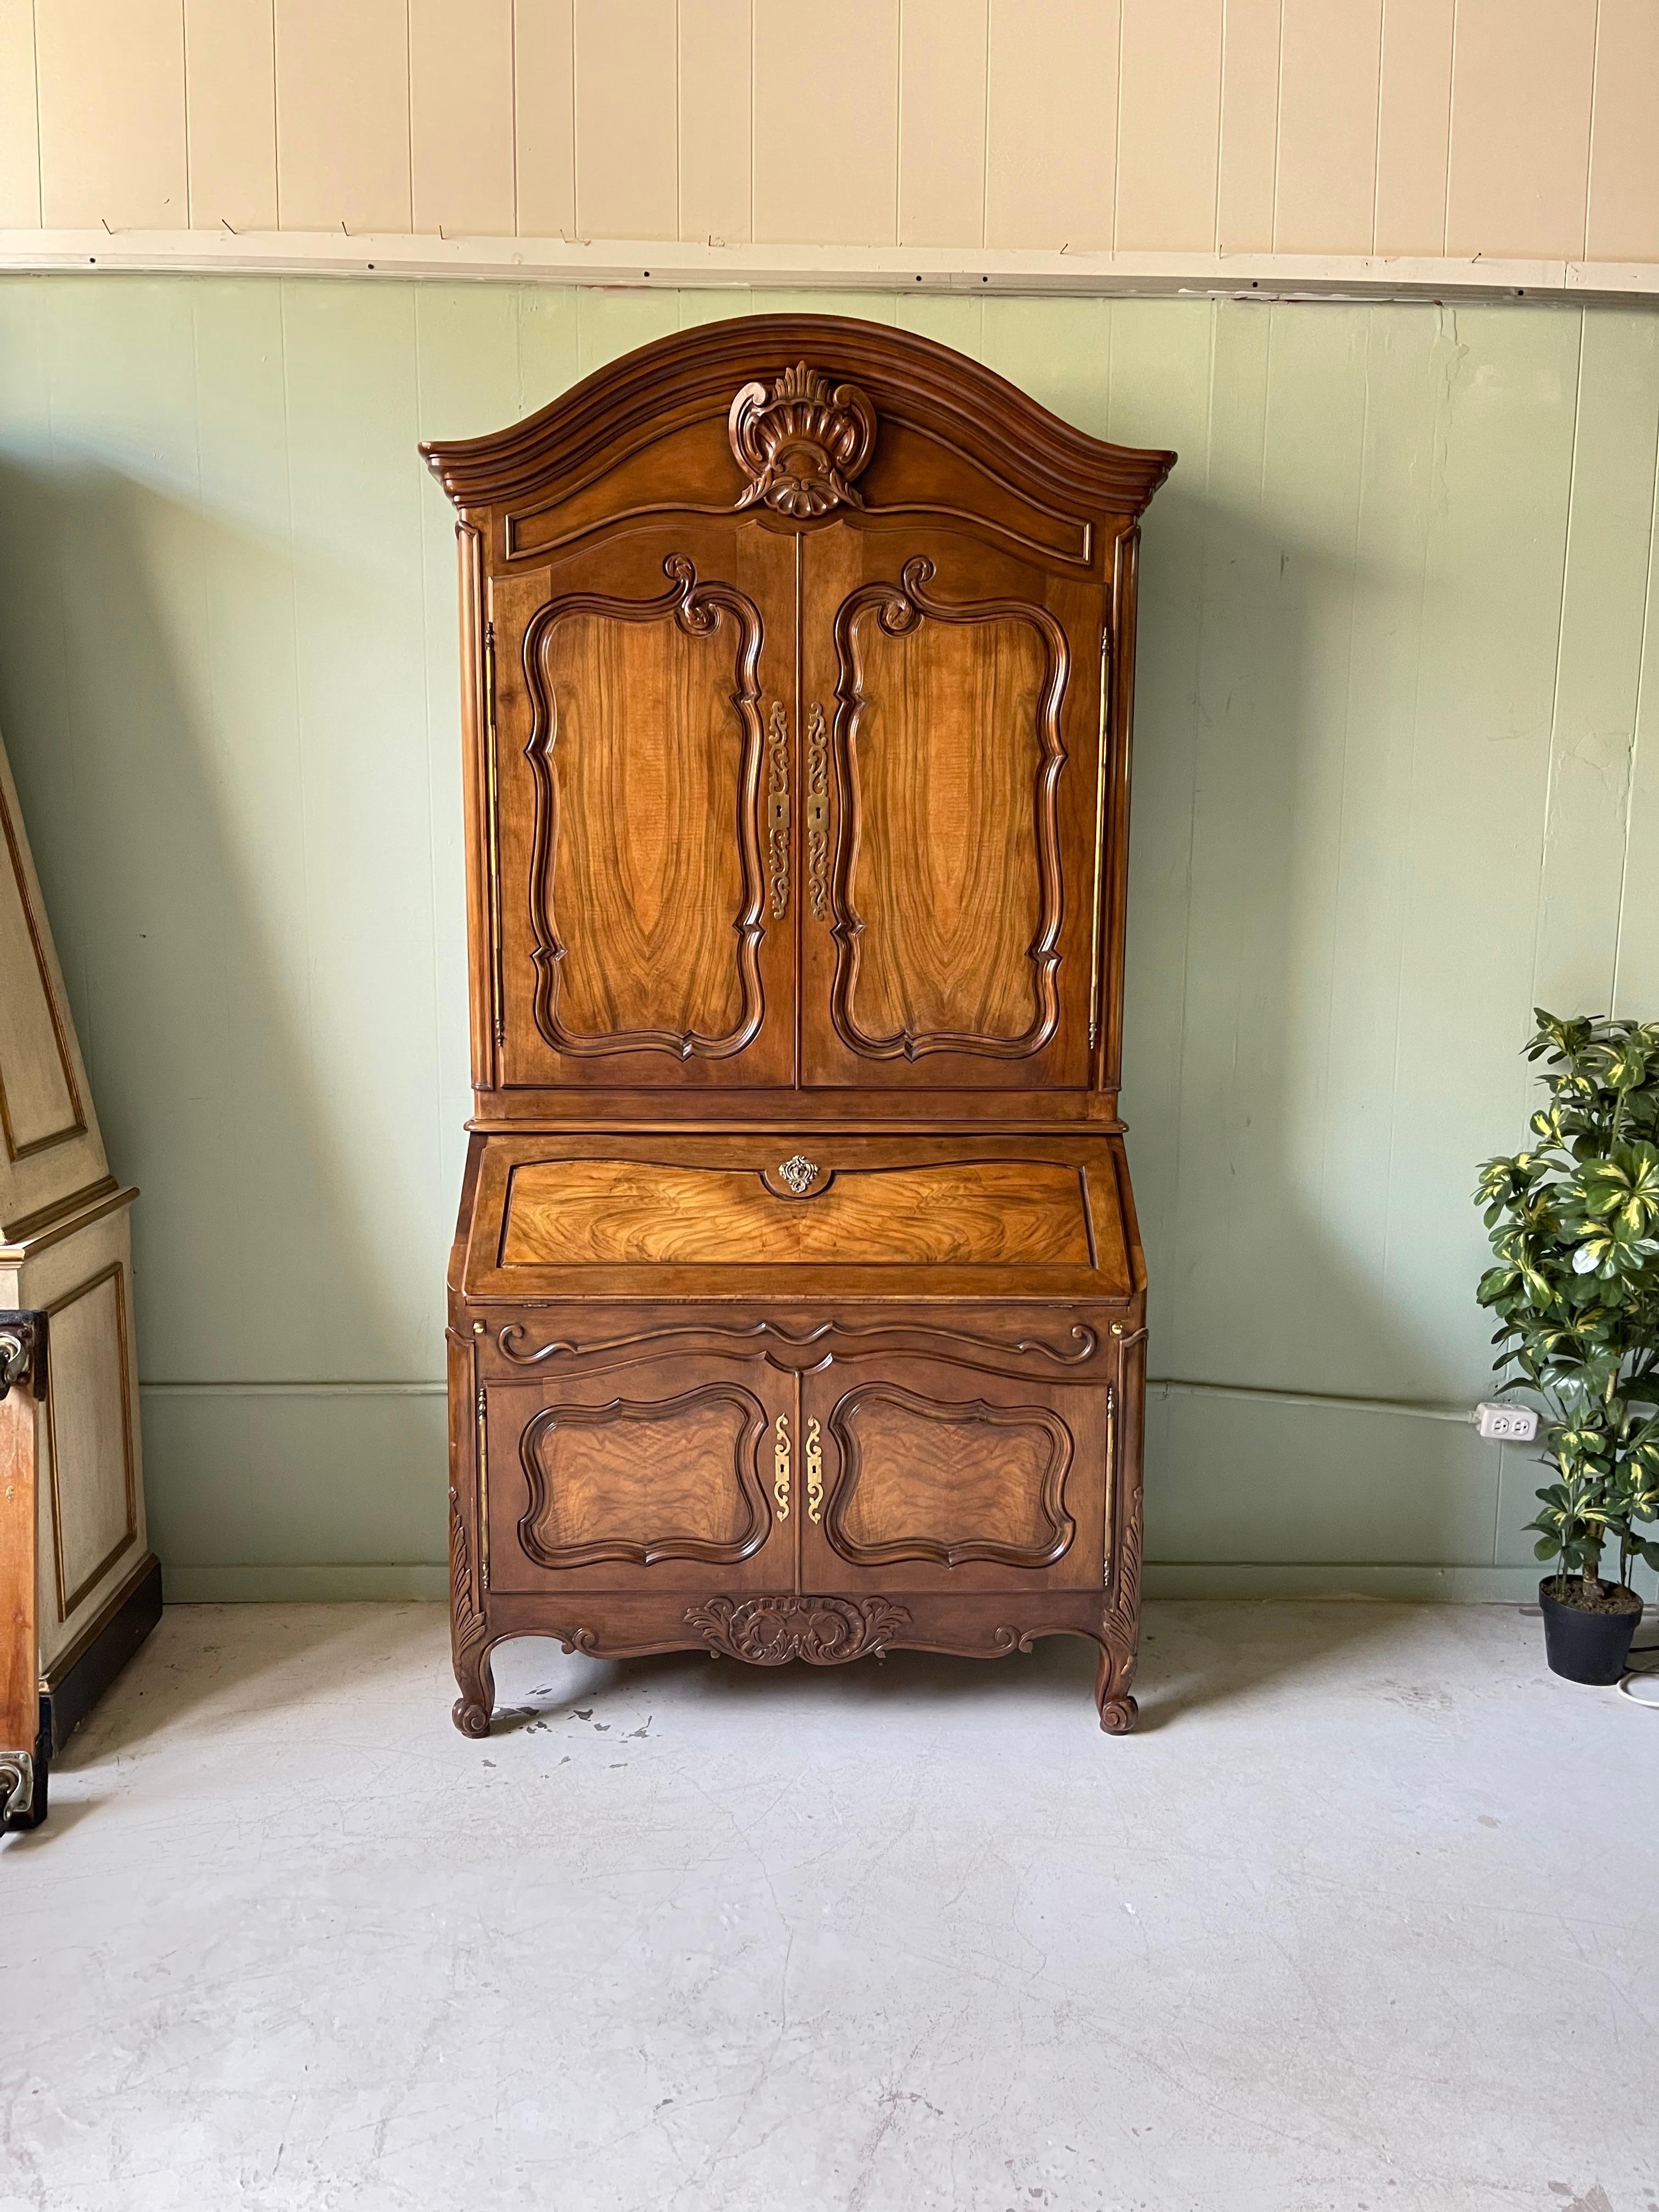 20th Century Collector's Edition secretary cabinet by Baker Furniture Company in the French style of Louis XV. The secretary is made of upper and lower cabinets made of carved walnut with working locks and keys. The upper cabinet features an arching